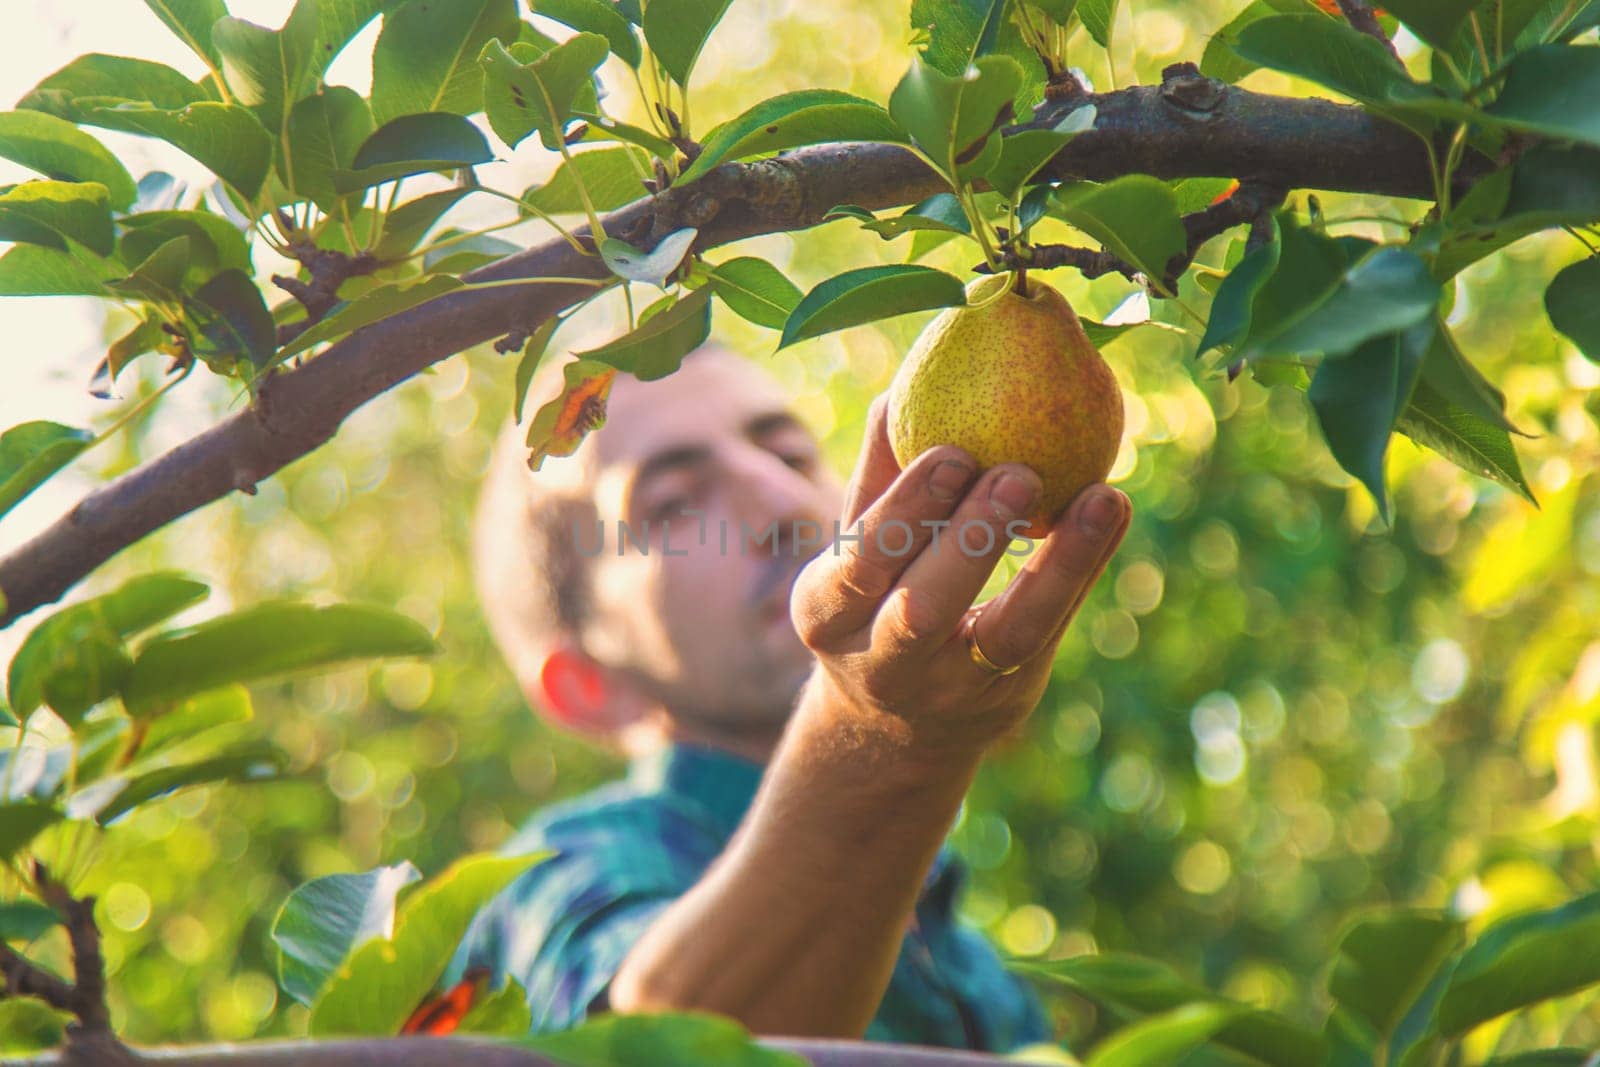 Pear harvest in the garden. Selective focus. Food.